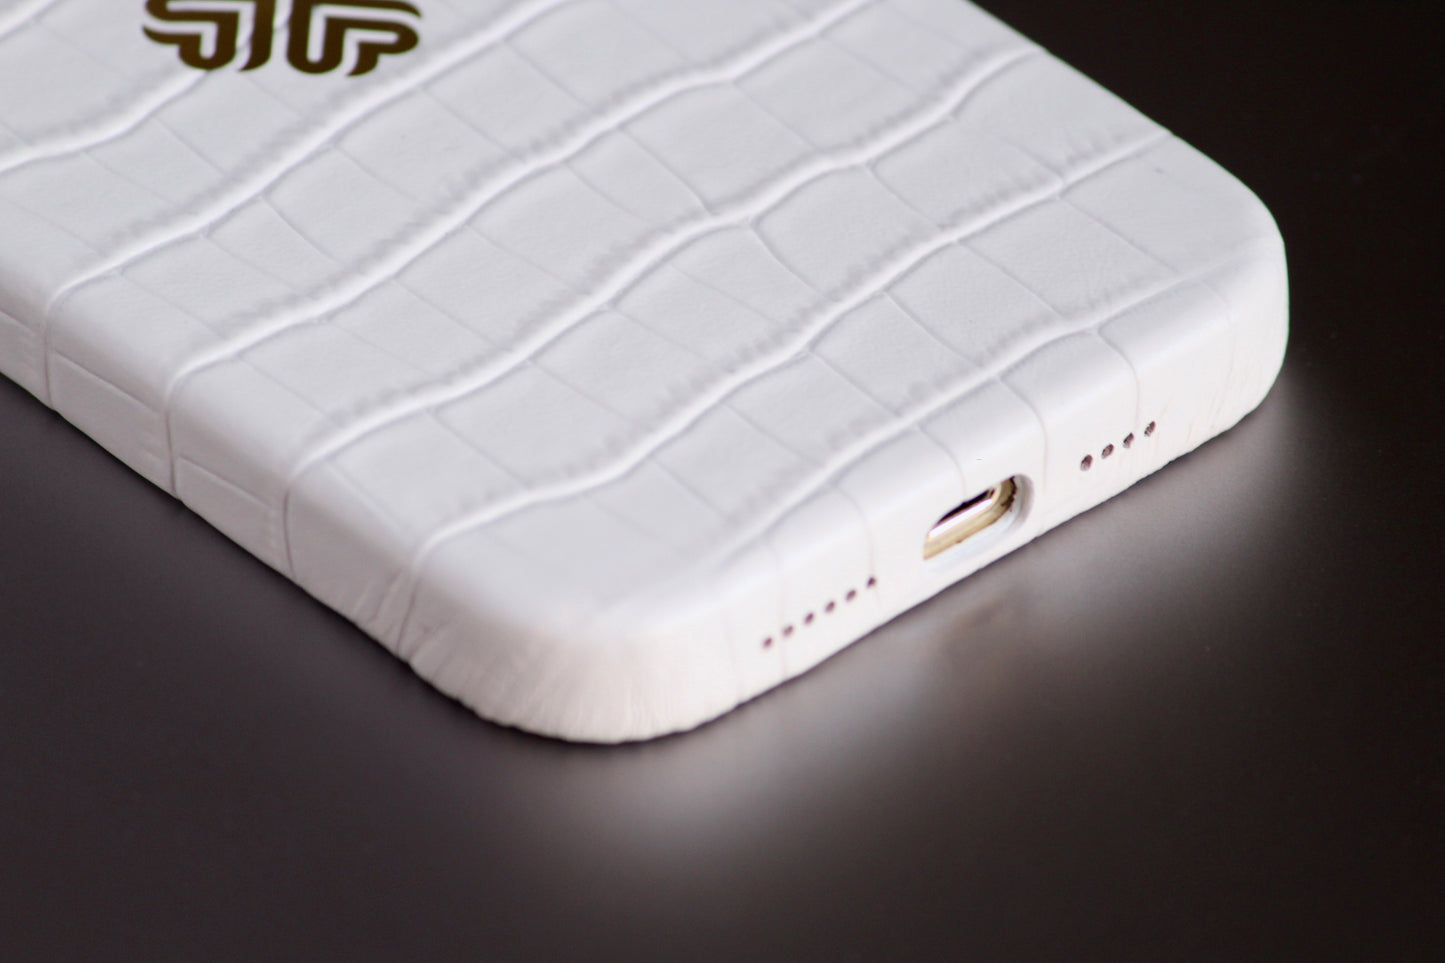 Rich White Leather iPhone Cover by Reldior